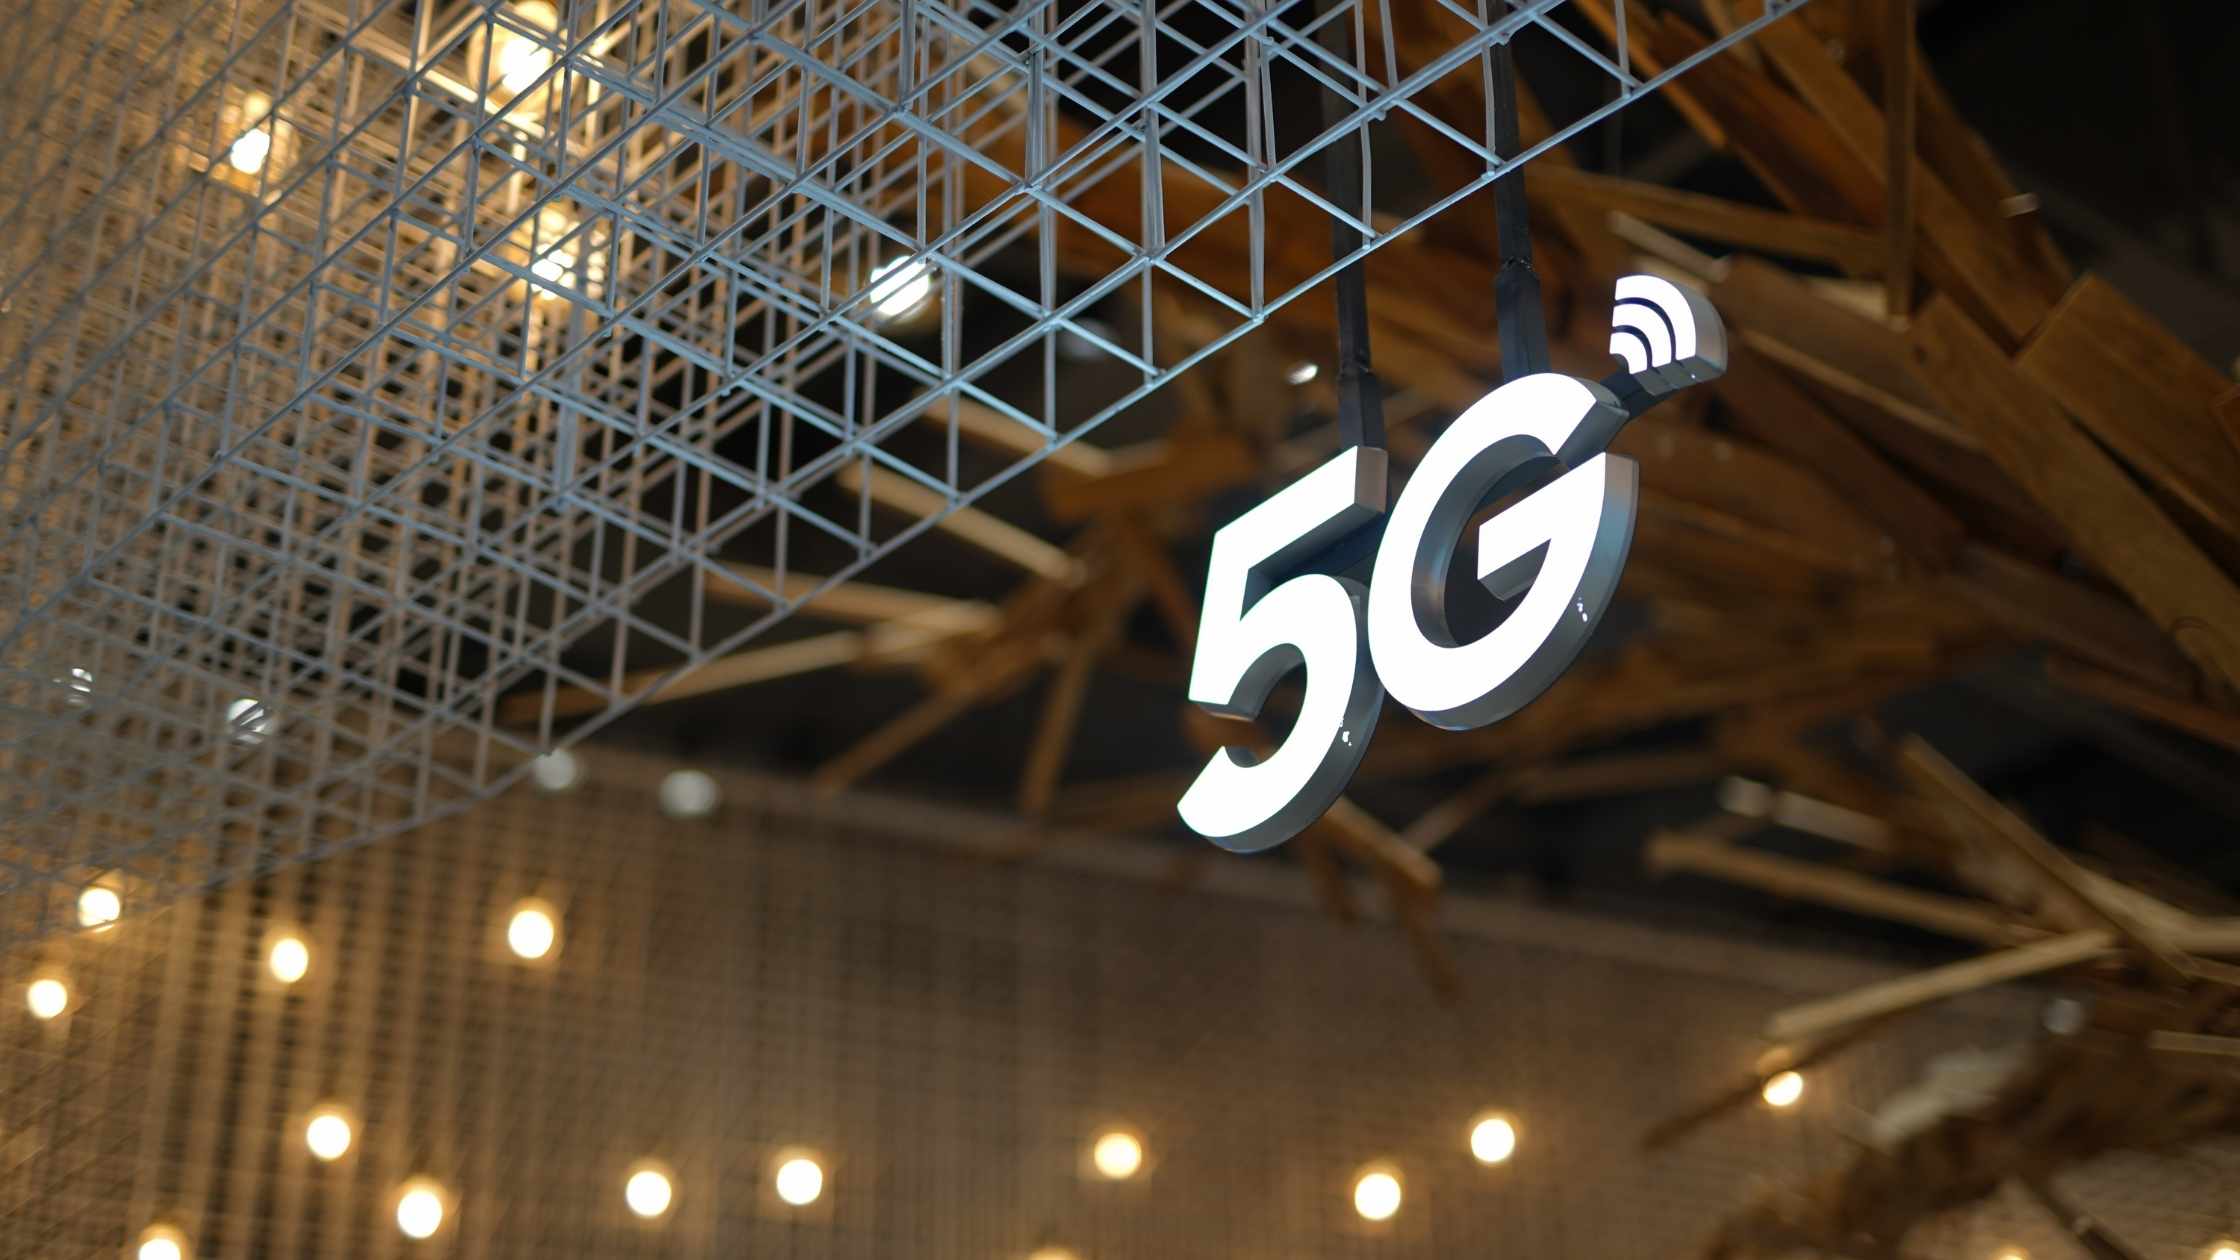 What is 5g technology